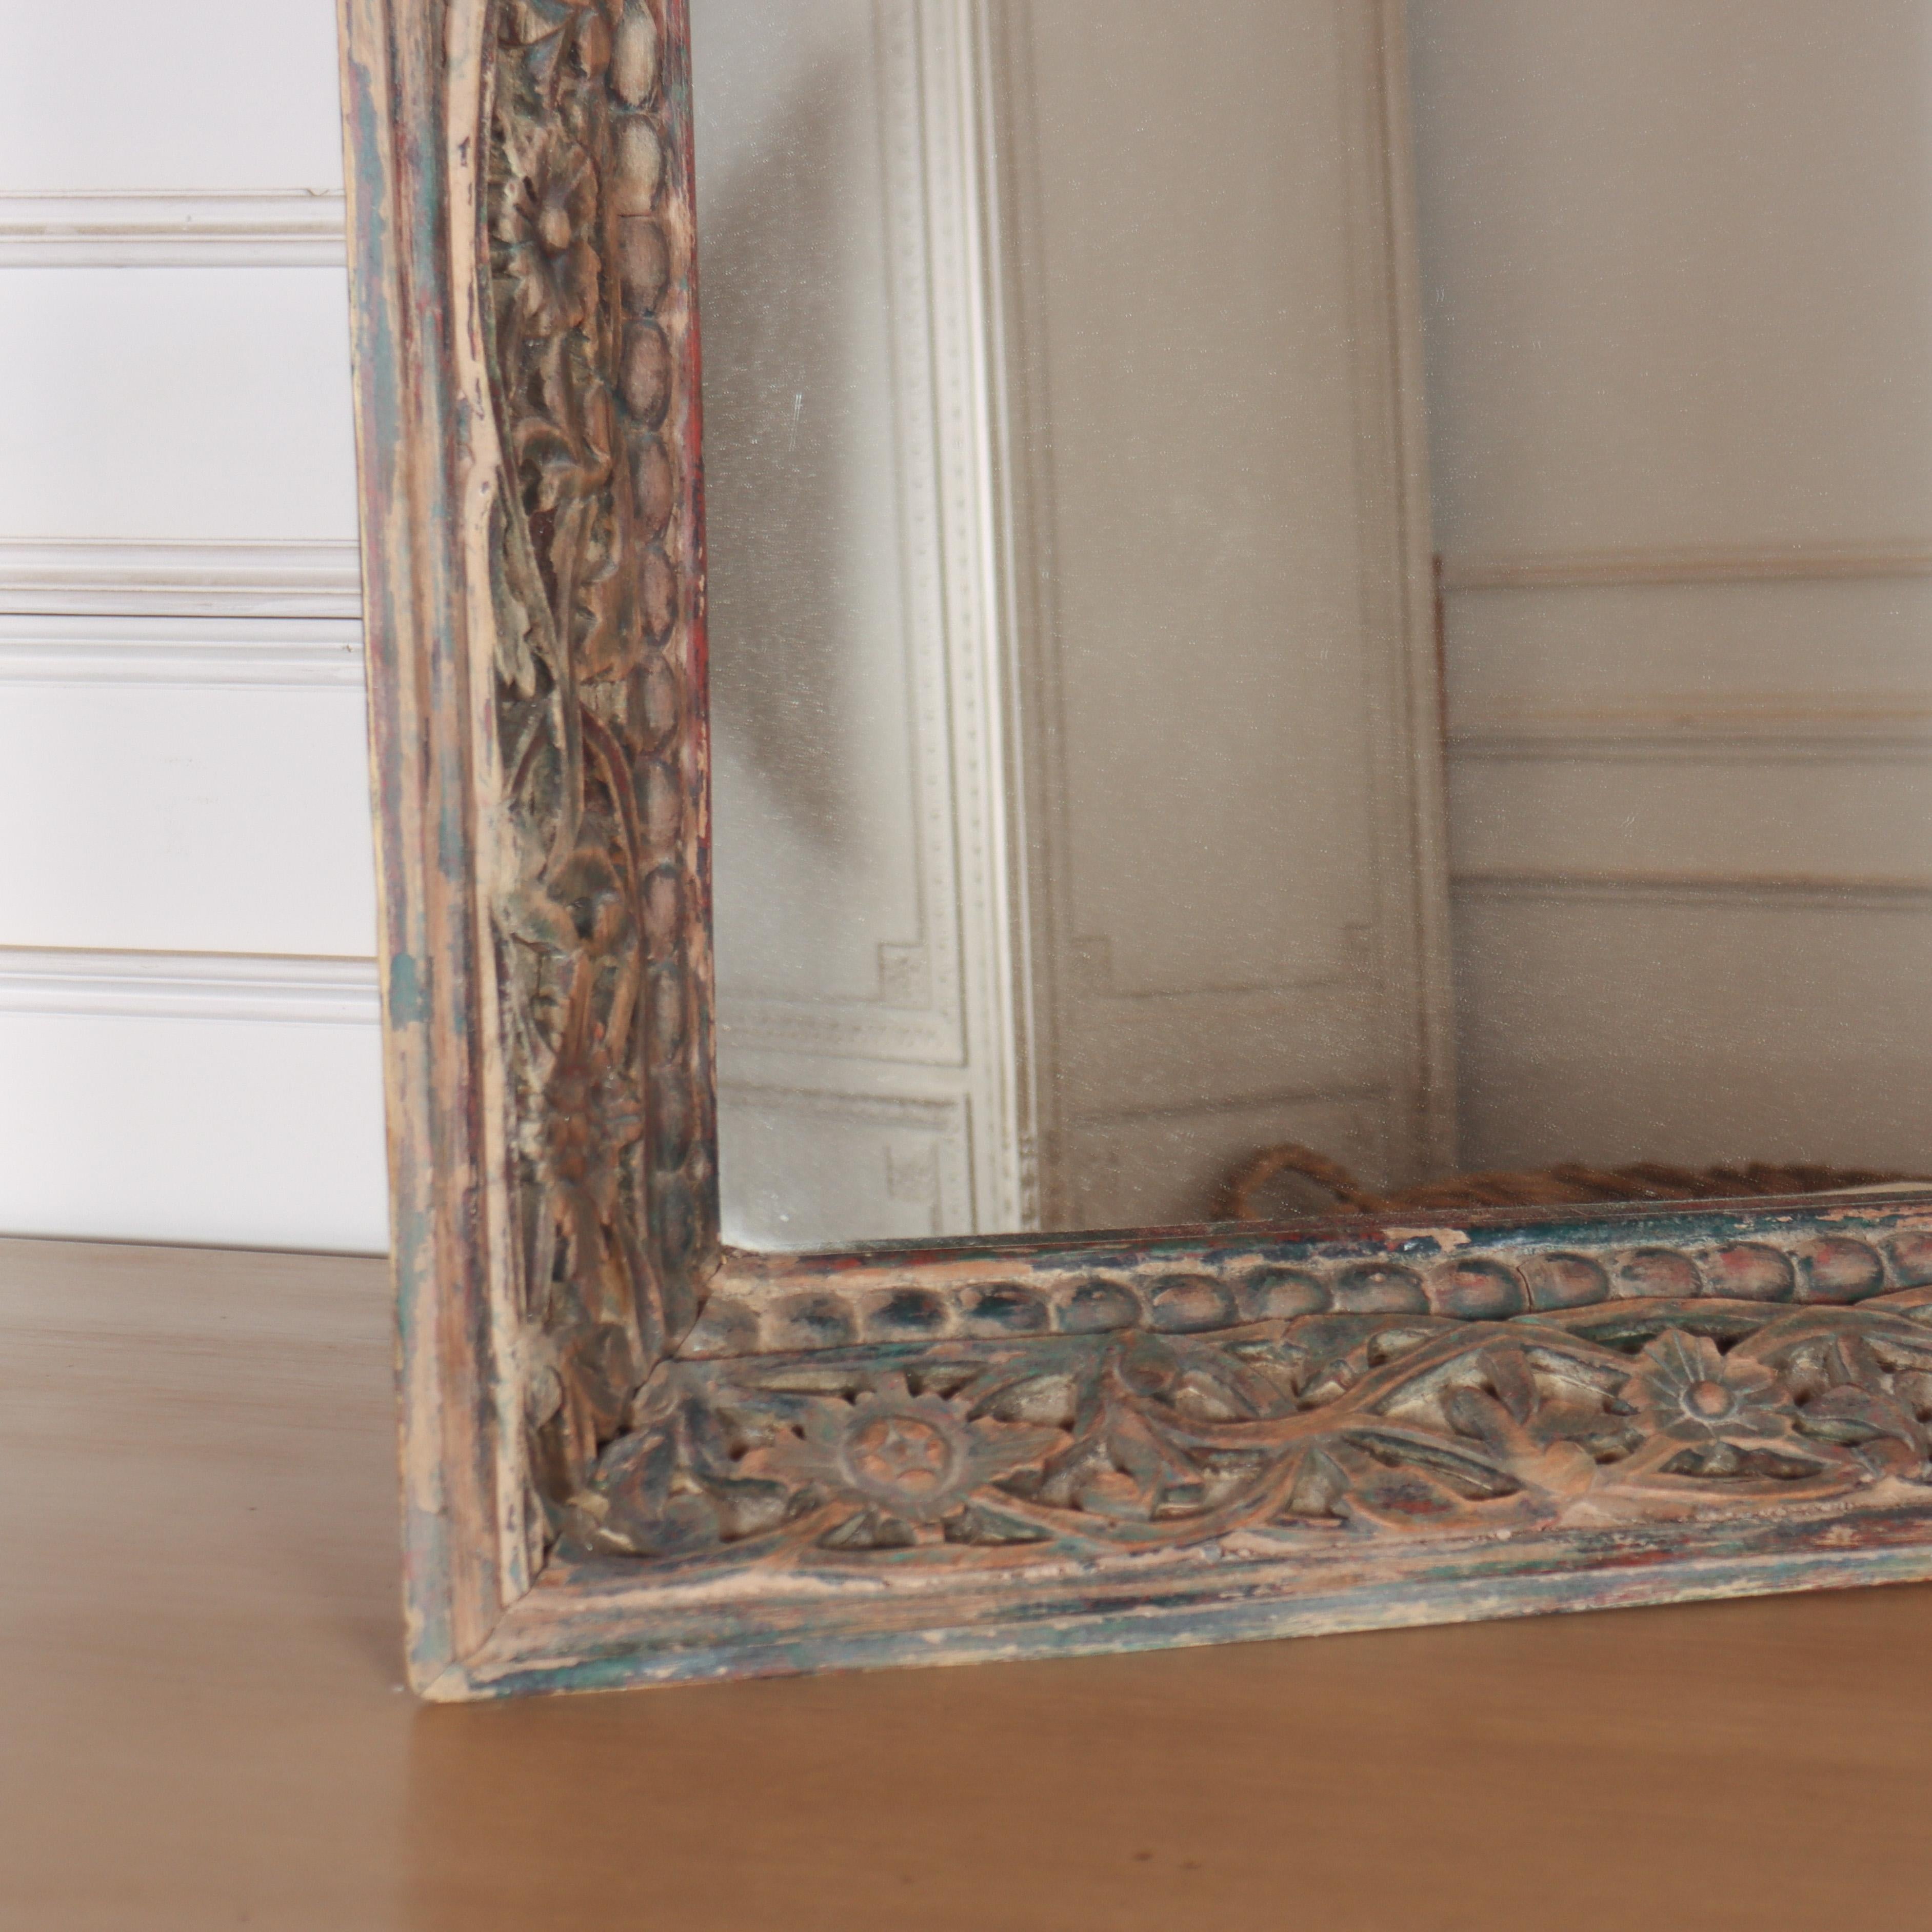 Large 19th C painted fretwork mirror. Lovely old finish. 1890.

Reference: 8255

Dimensions
37.5 inches (95 cms) Wide
4 inches (10 cms) Deep
47.5 inches (121 cms) High